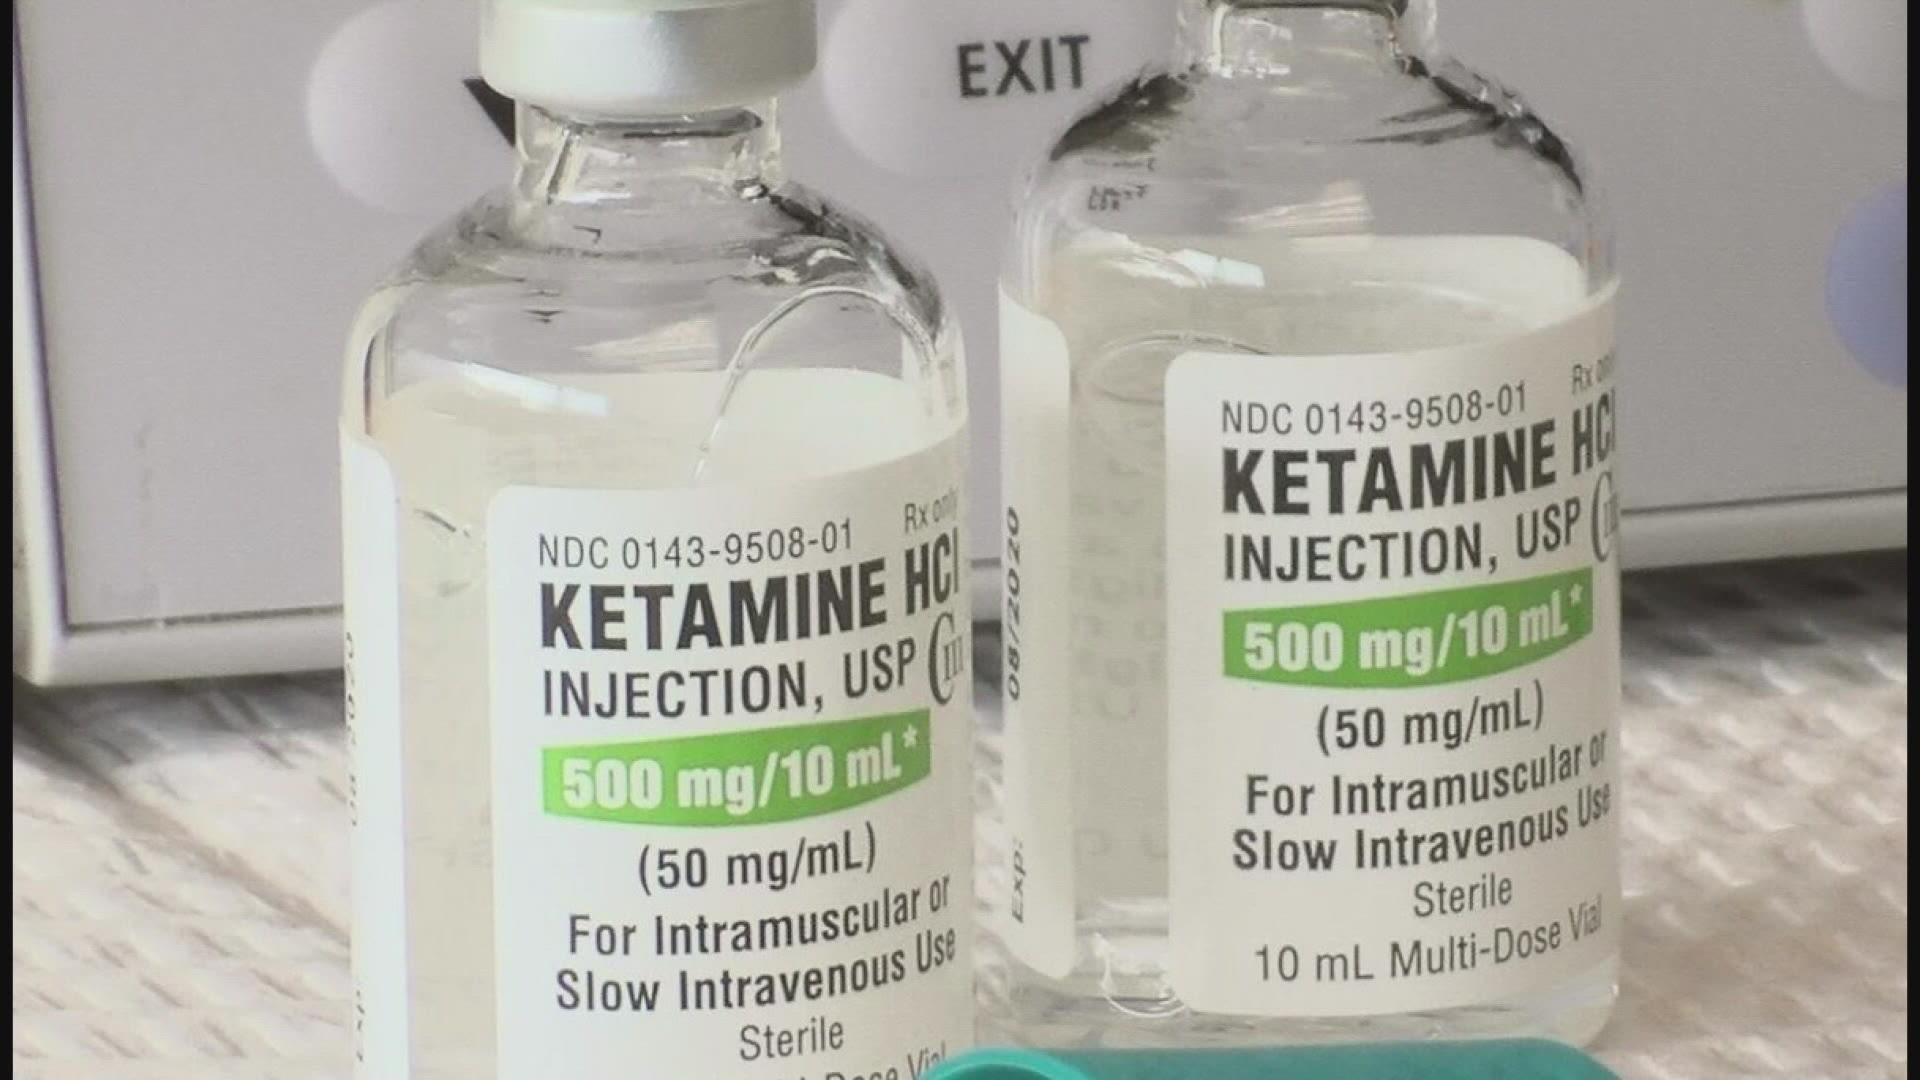 Ketamine is well known as a party drug and an anesthetic, but a growing body of evidence suggests it could also be a breakthrough mental health treatment.